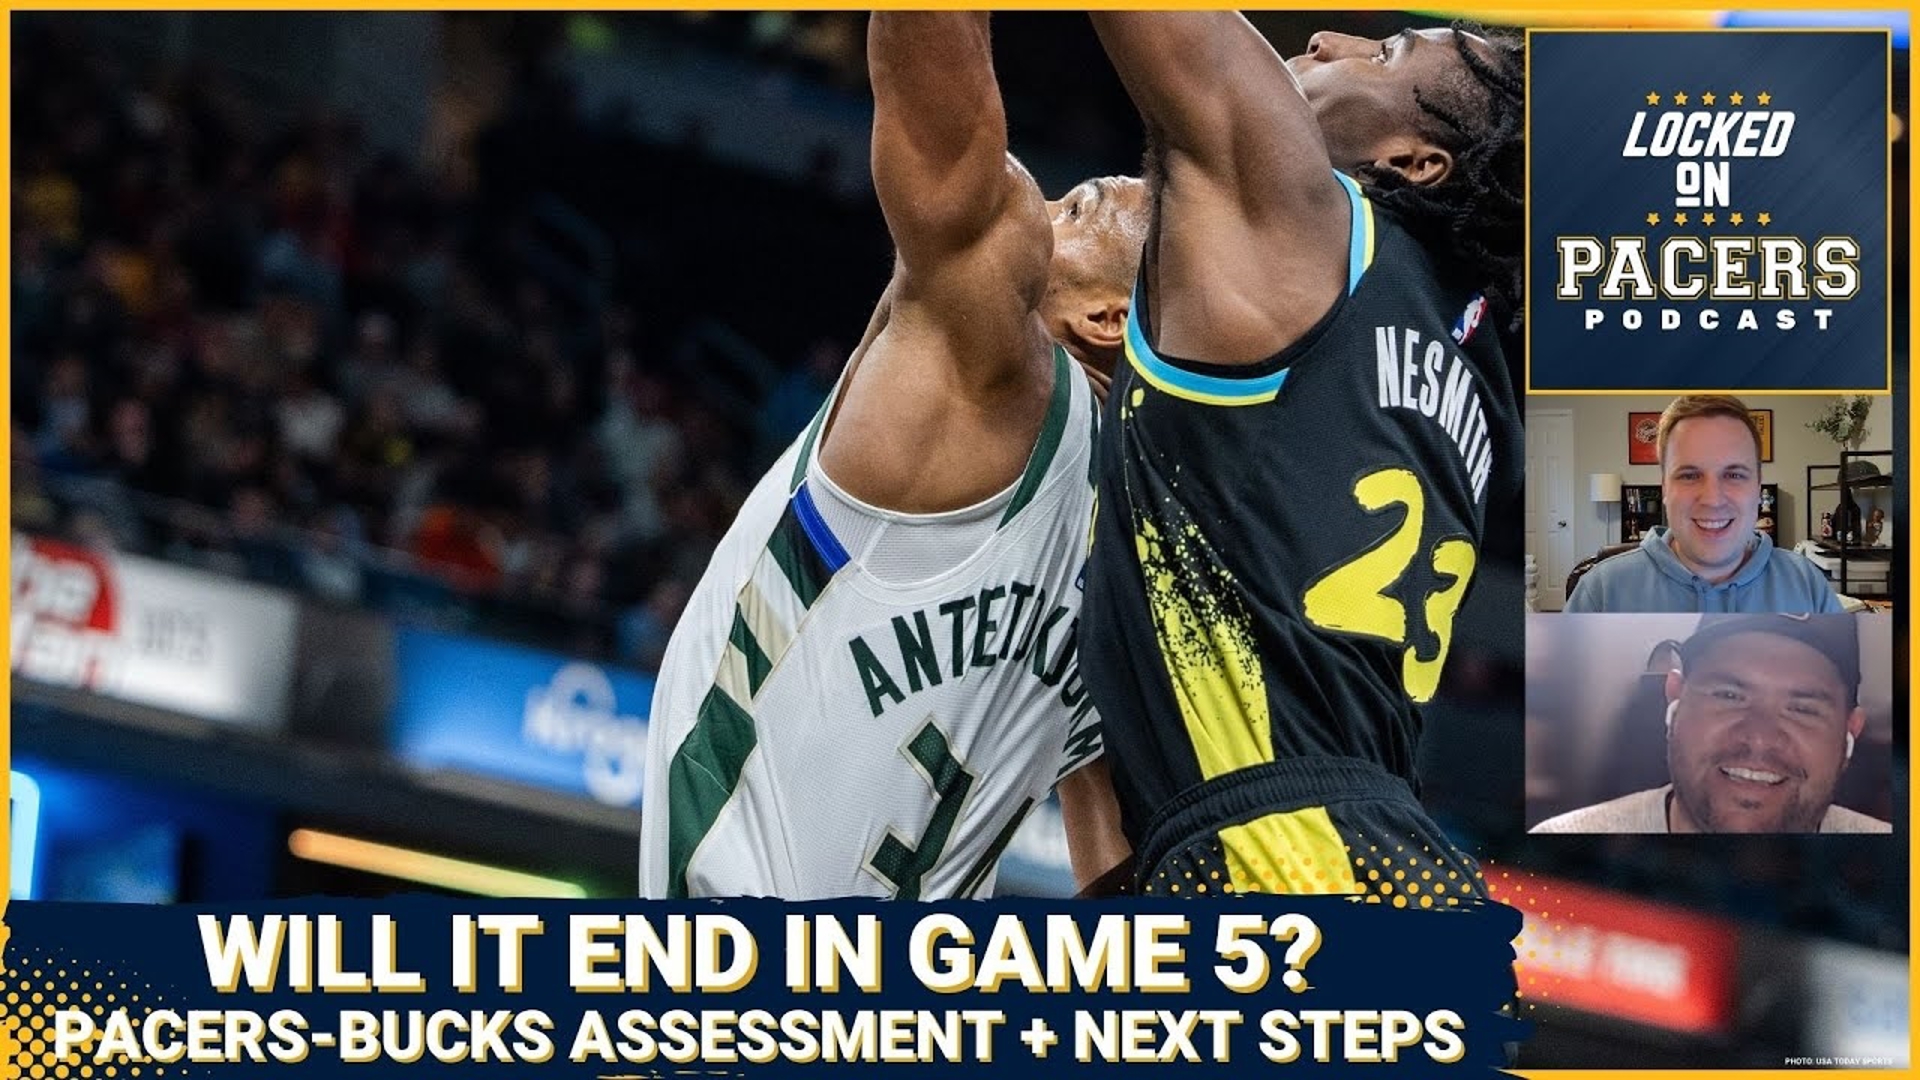 The Indiana Pacers have a commanding 3-1 lead over the Milwaukee Bucks. Will the Pacers end the series tonight? How much do injuries give Milwaukee hope?